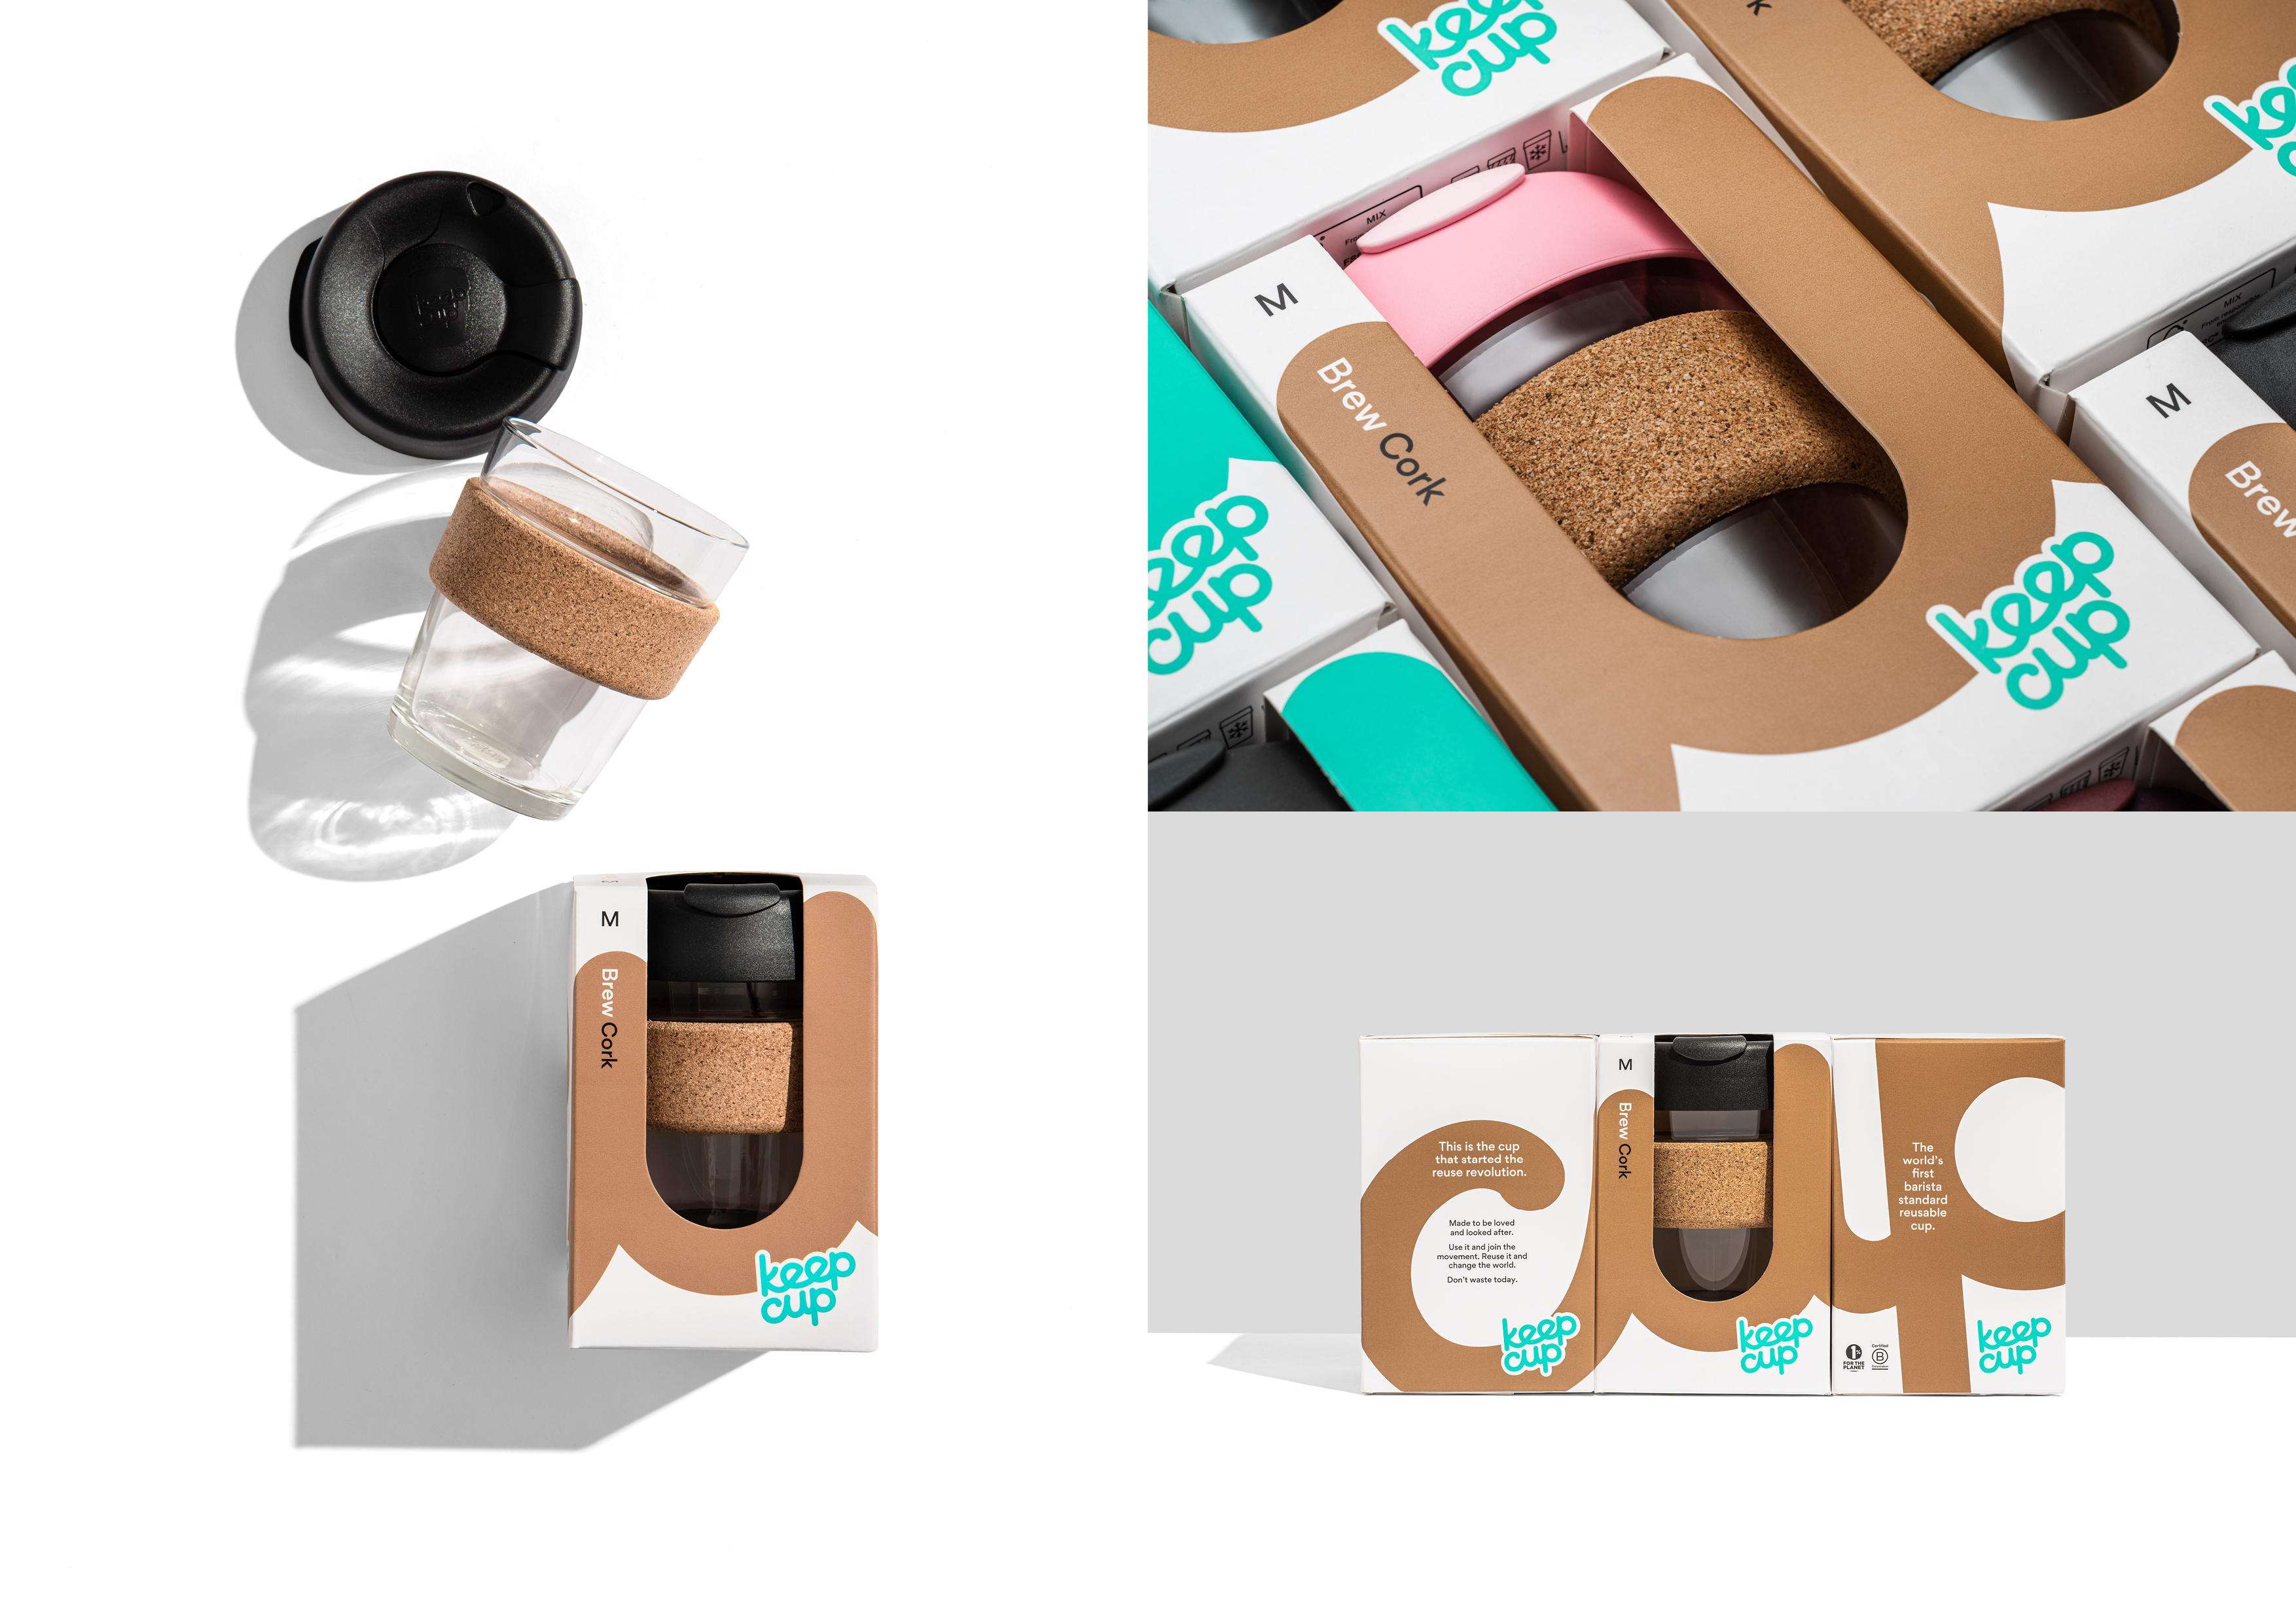 Features and benefits of KeepCup